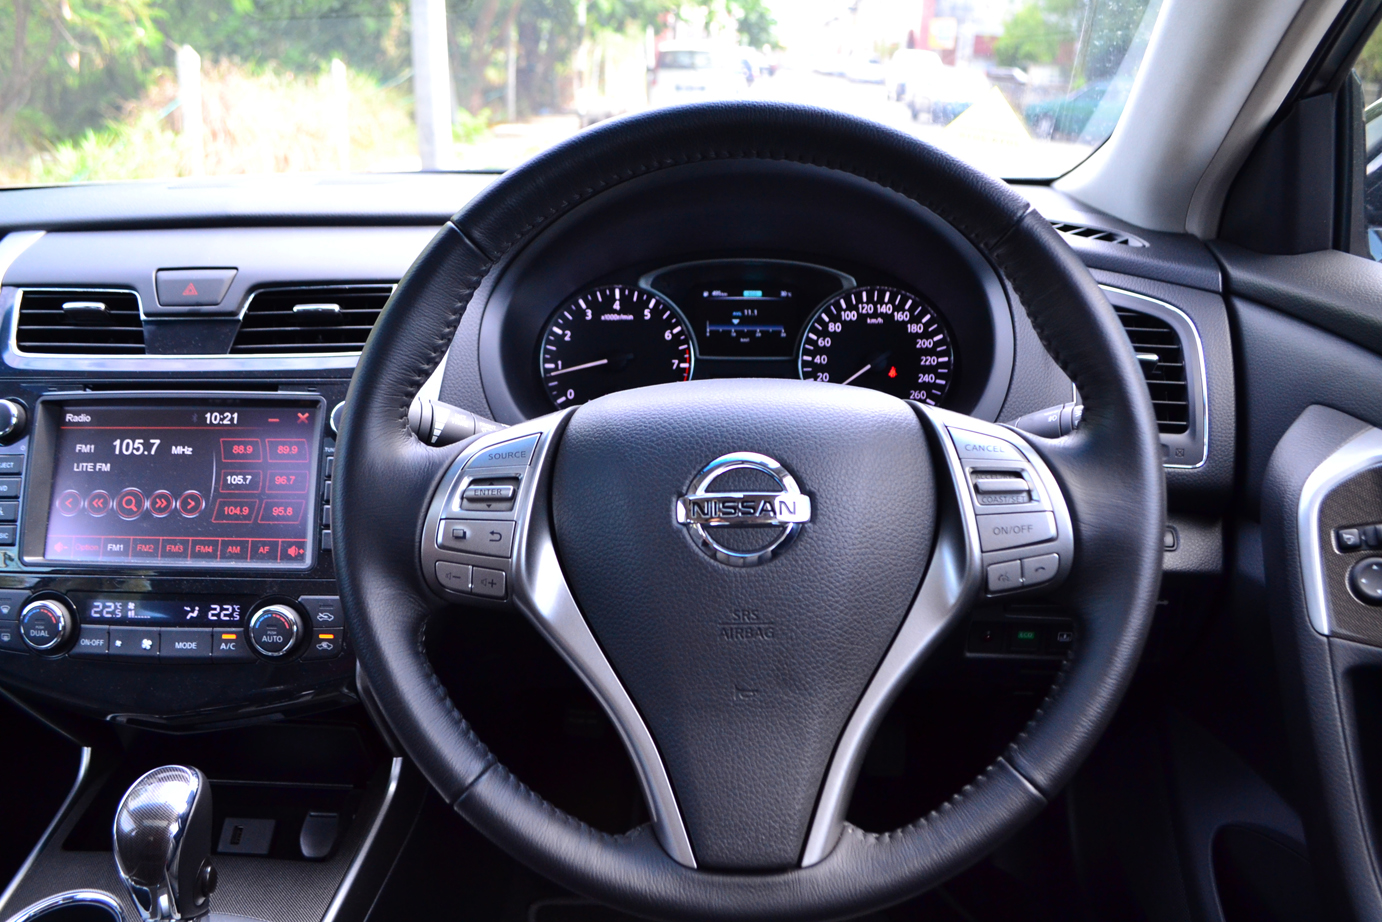 The Nissan Teana - Fortune Favors the Bold - kensomuse